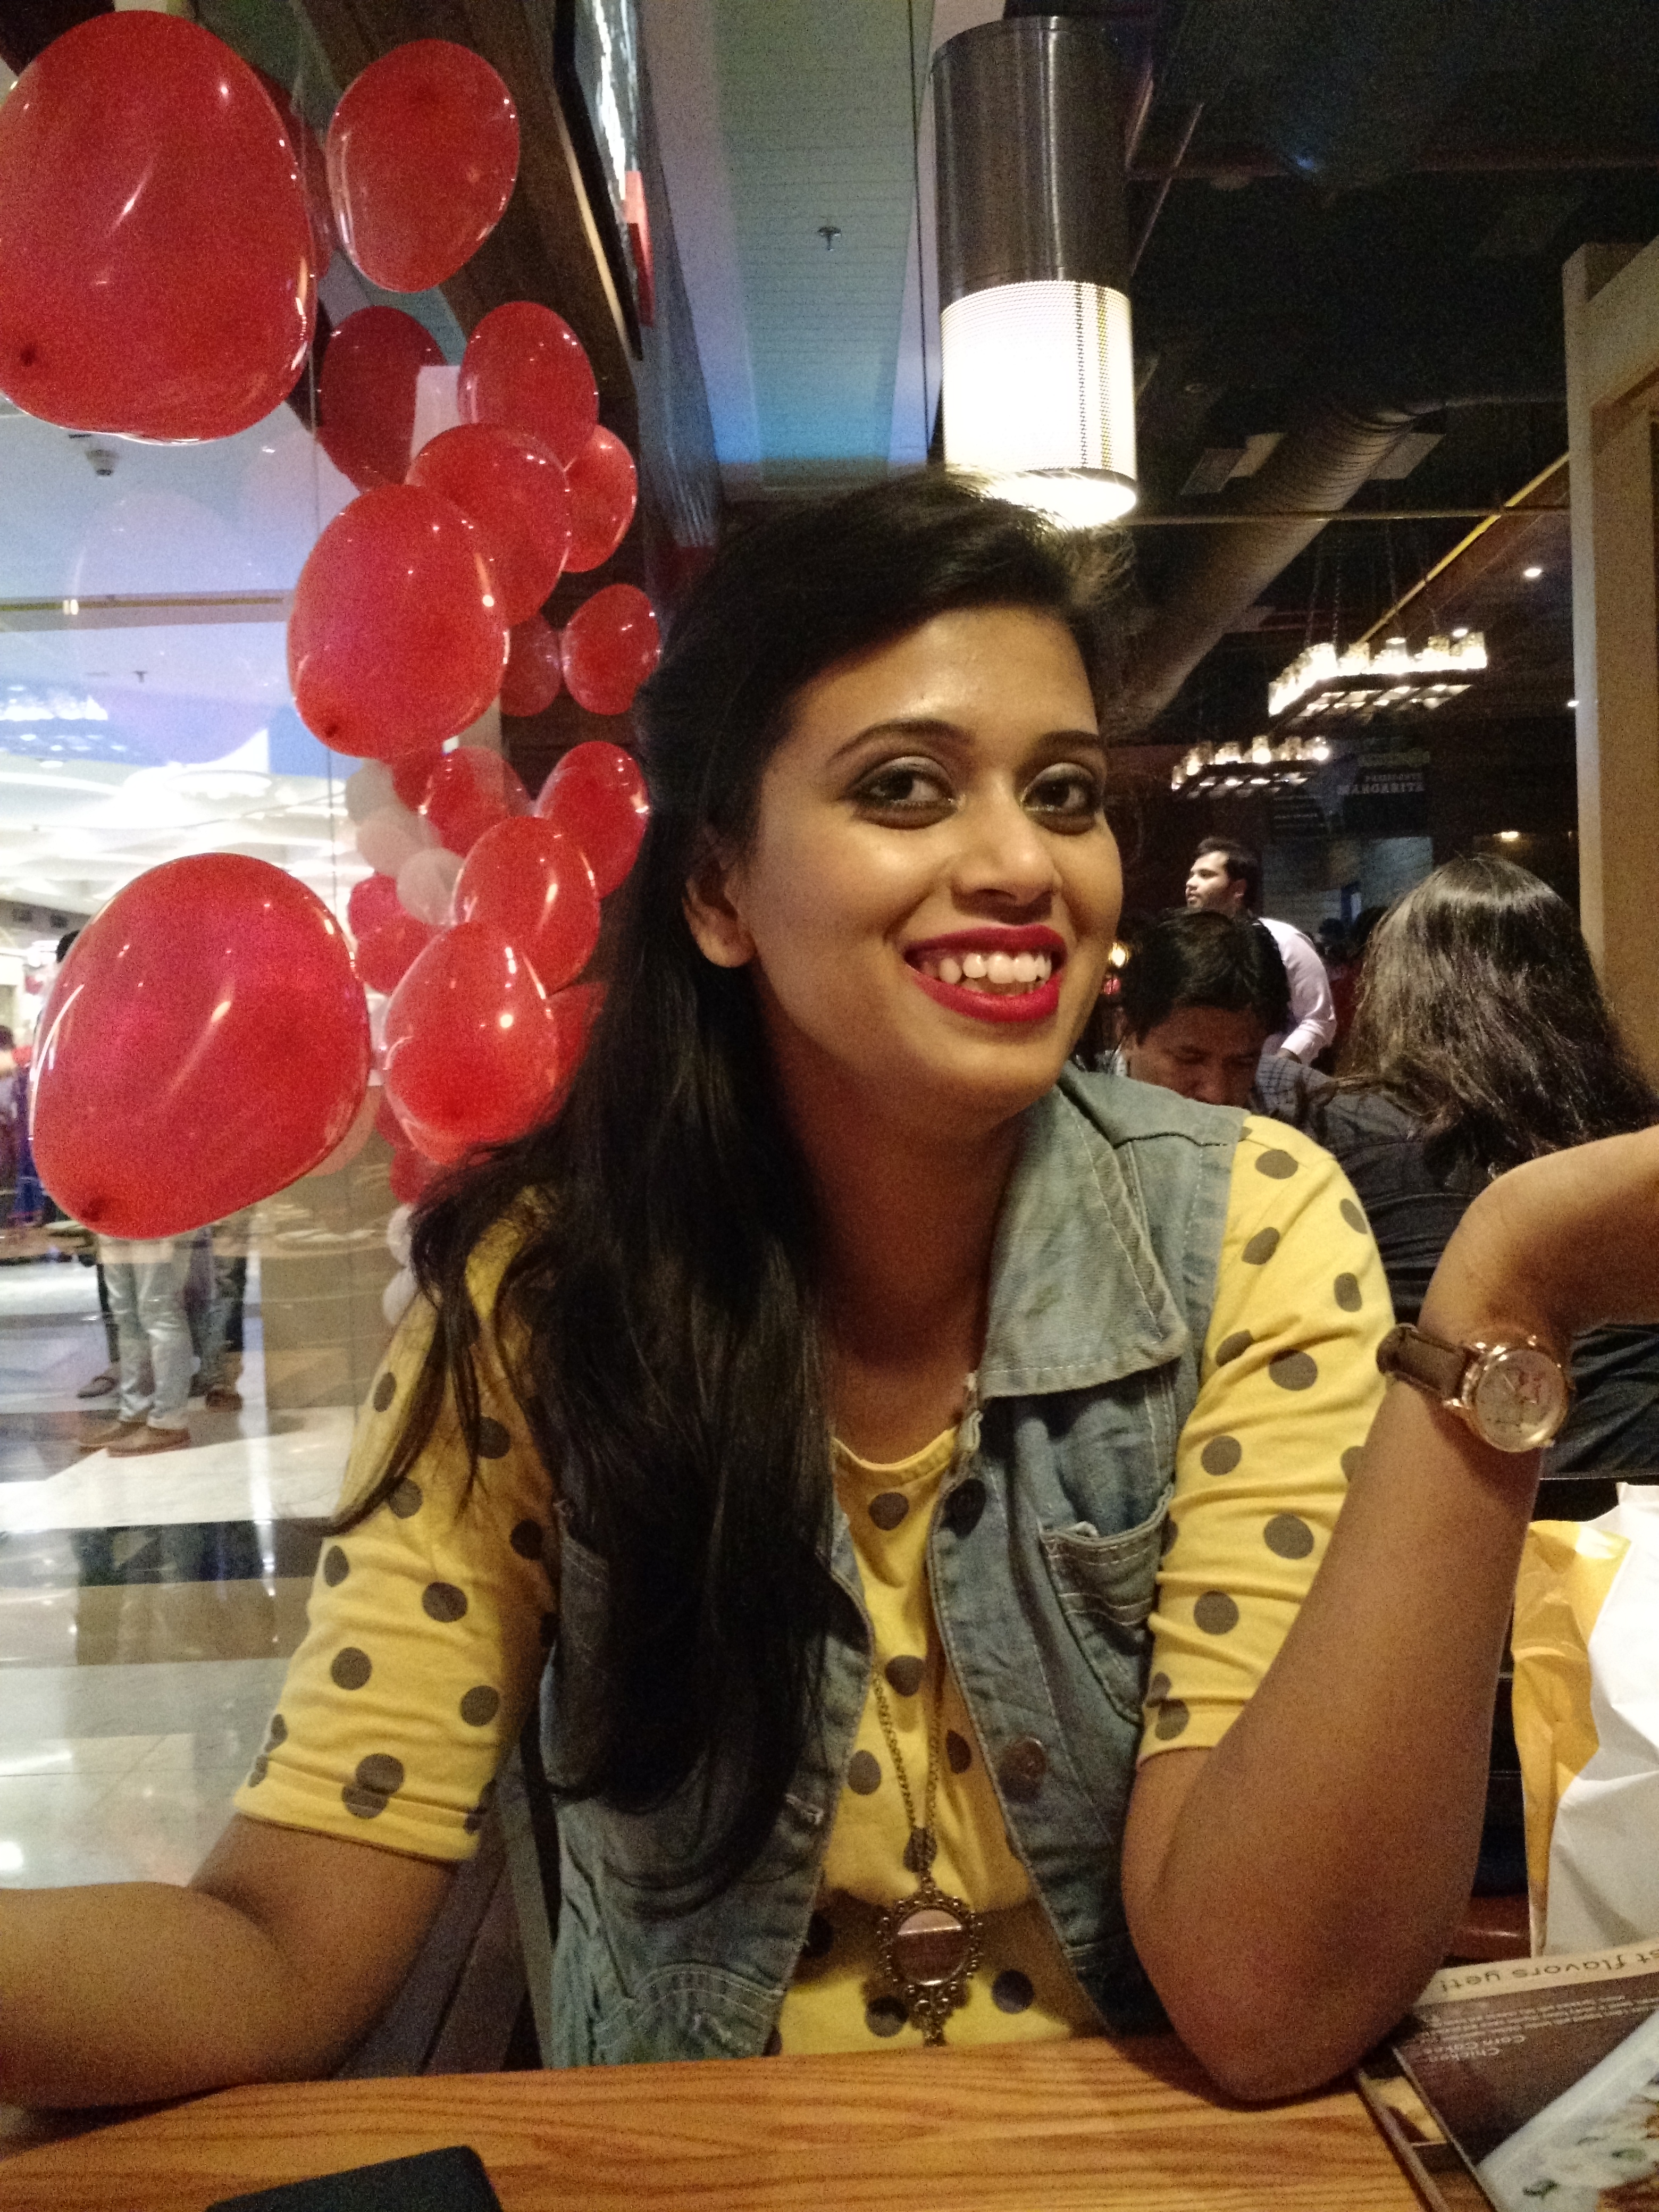 Balloons coming out of Sharmi's ears :D